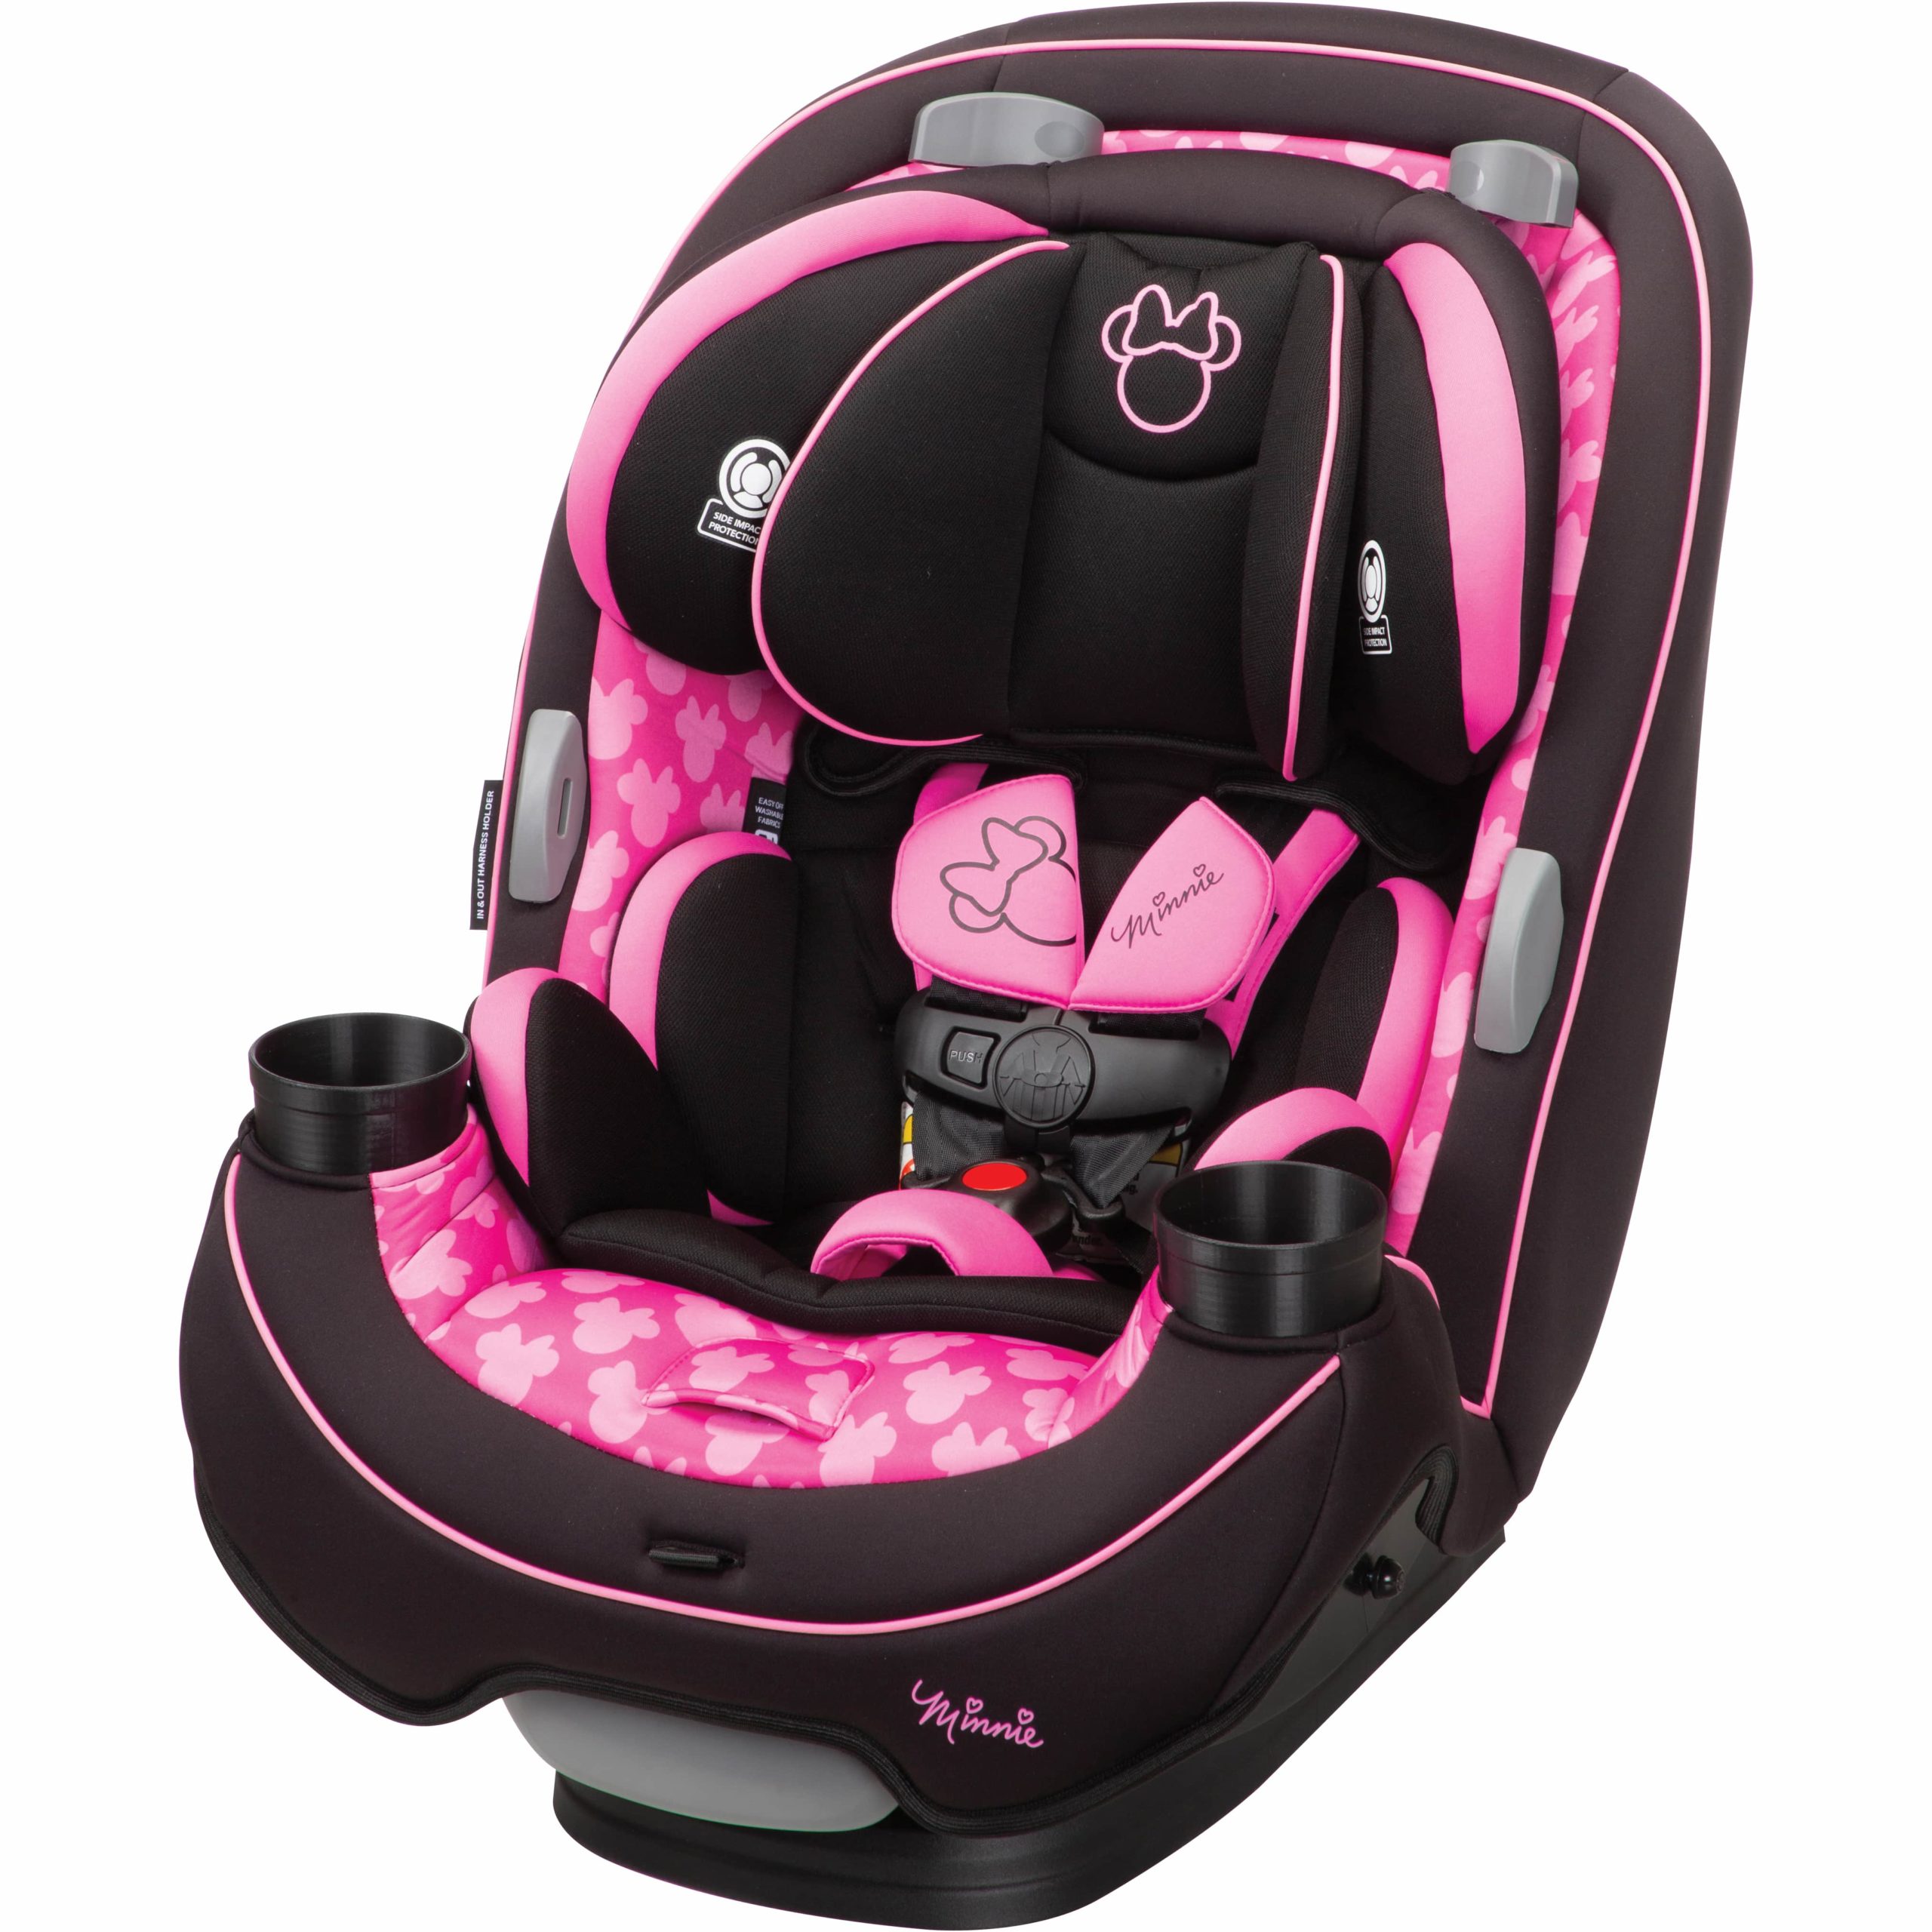 Minnie pink all in one car seat_safety 1st_the mood guide minnie mouse car seat